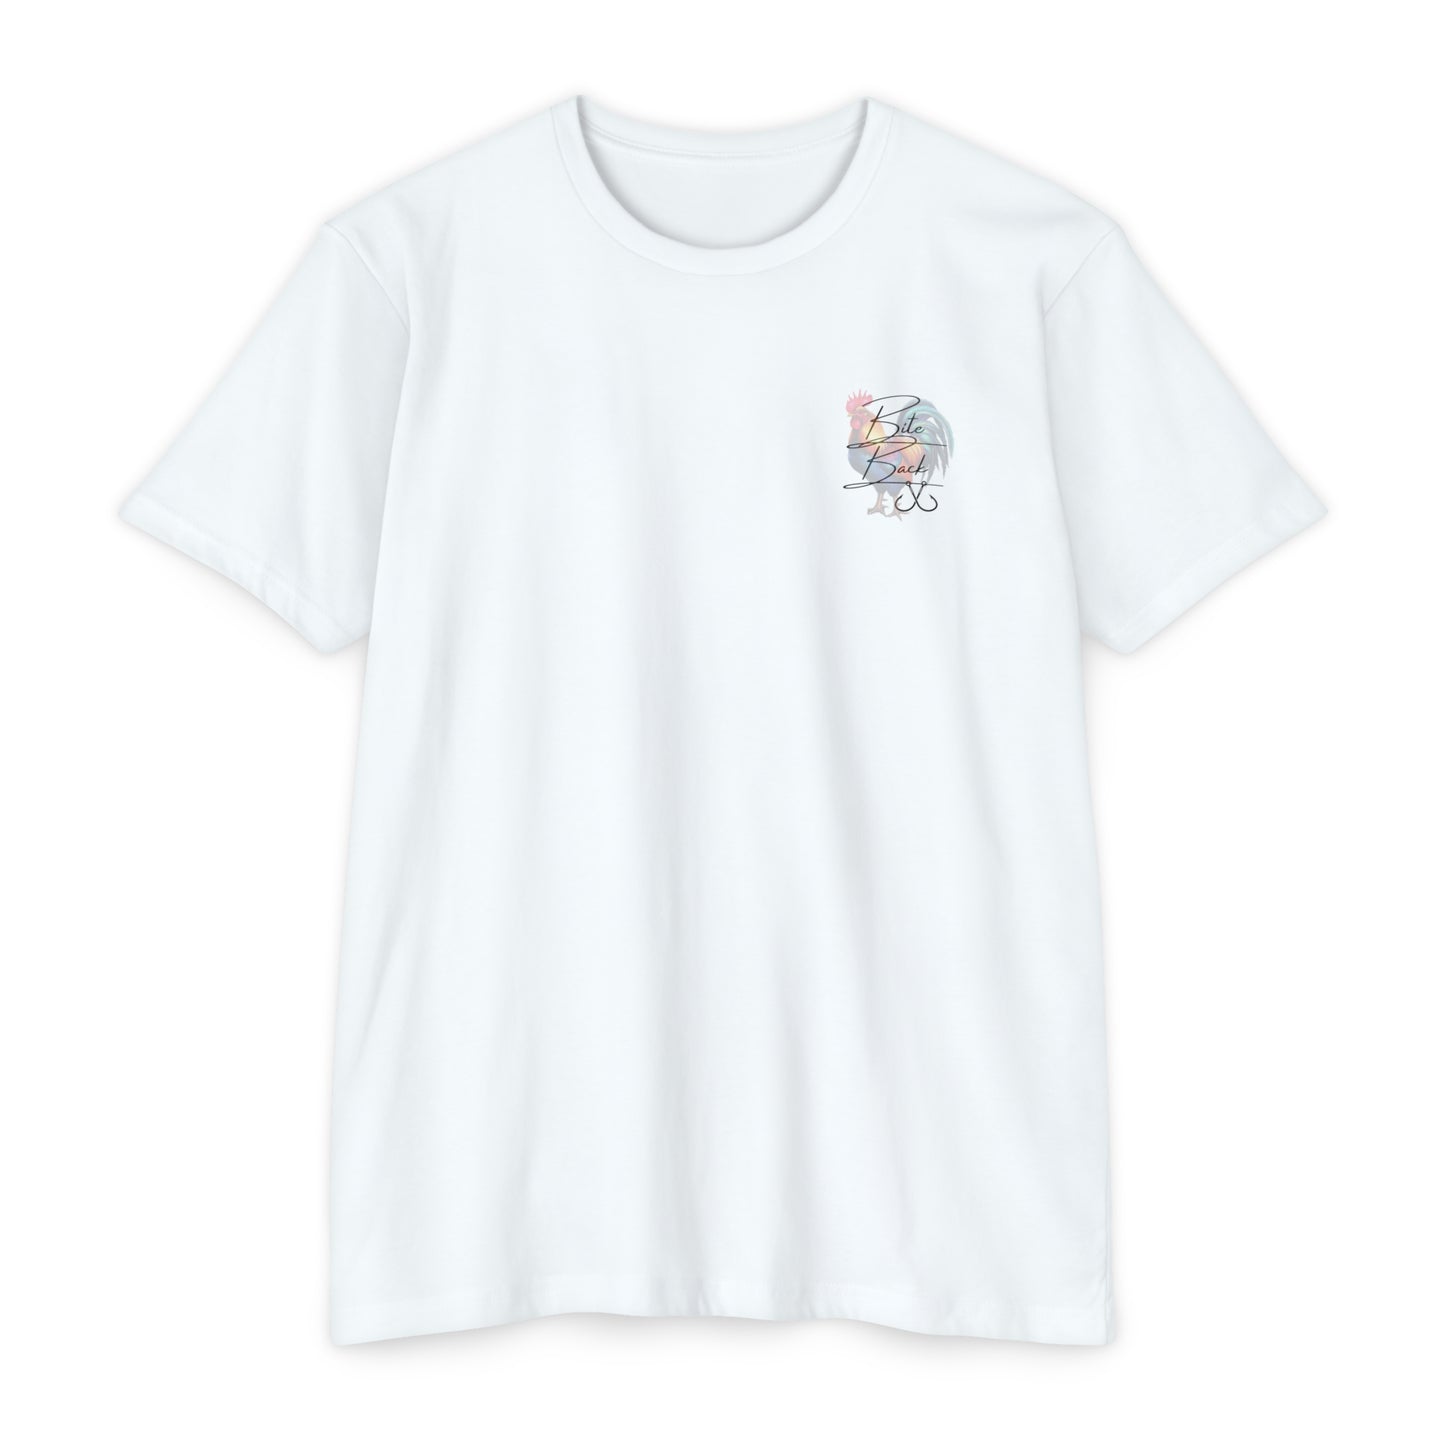 Key West Rooster T-shirt